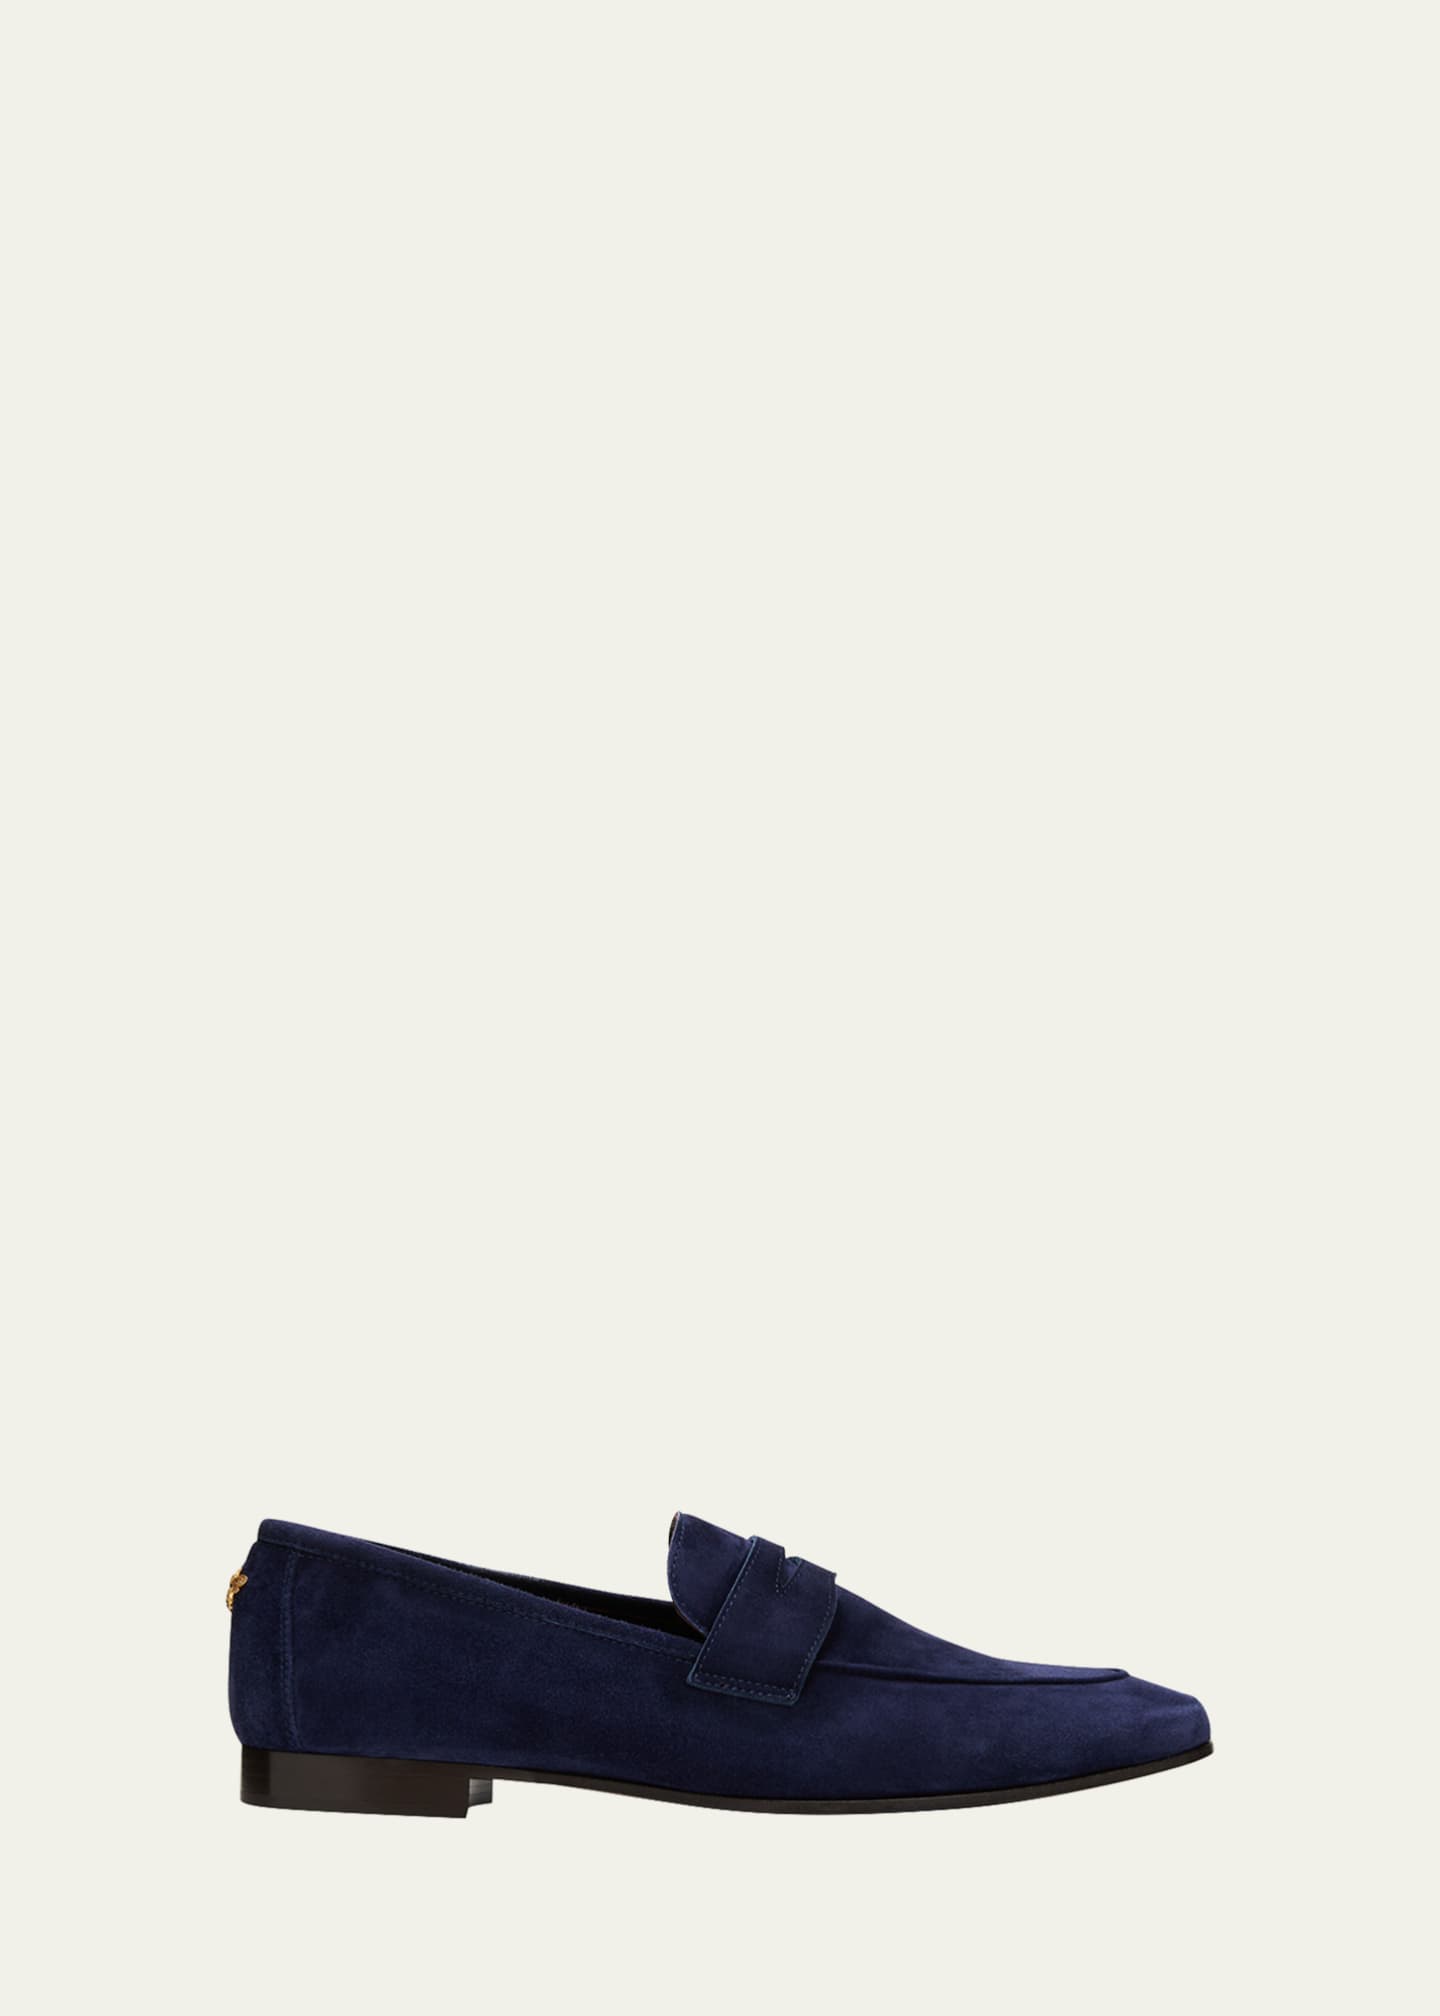 Bougeotte Suede Slip-On Penny Loafer, Navy - Bergdorf Goodman